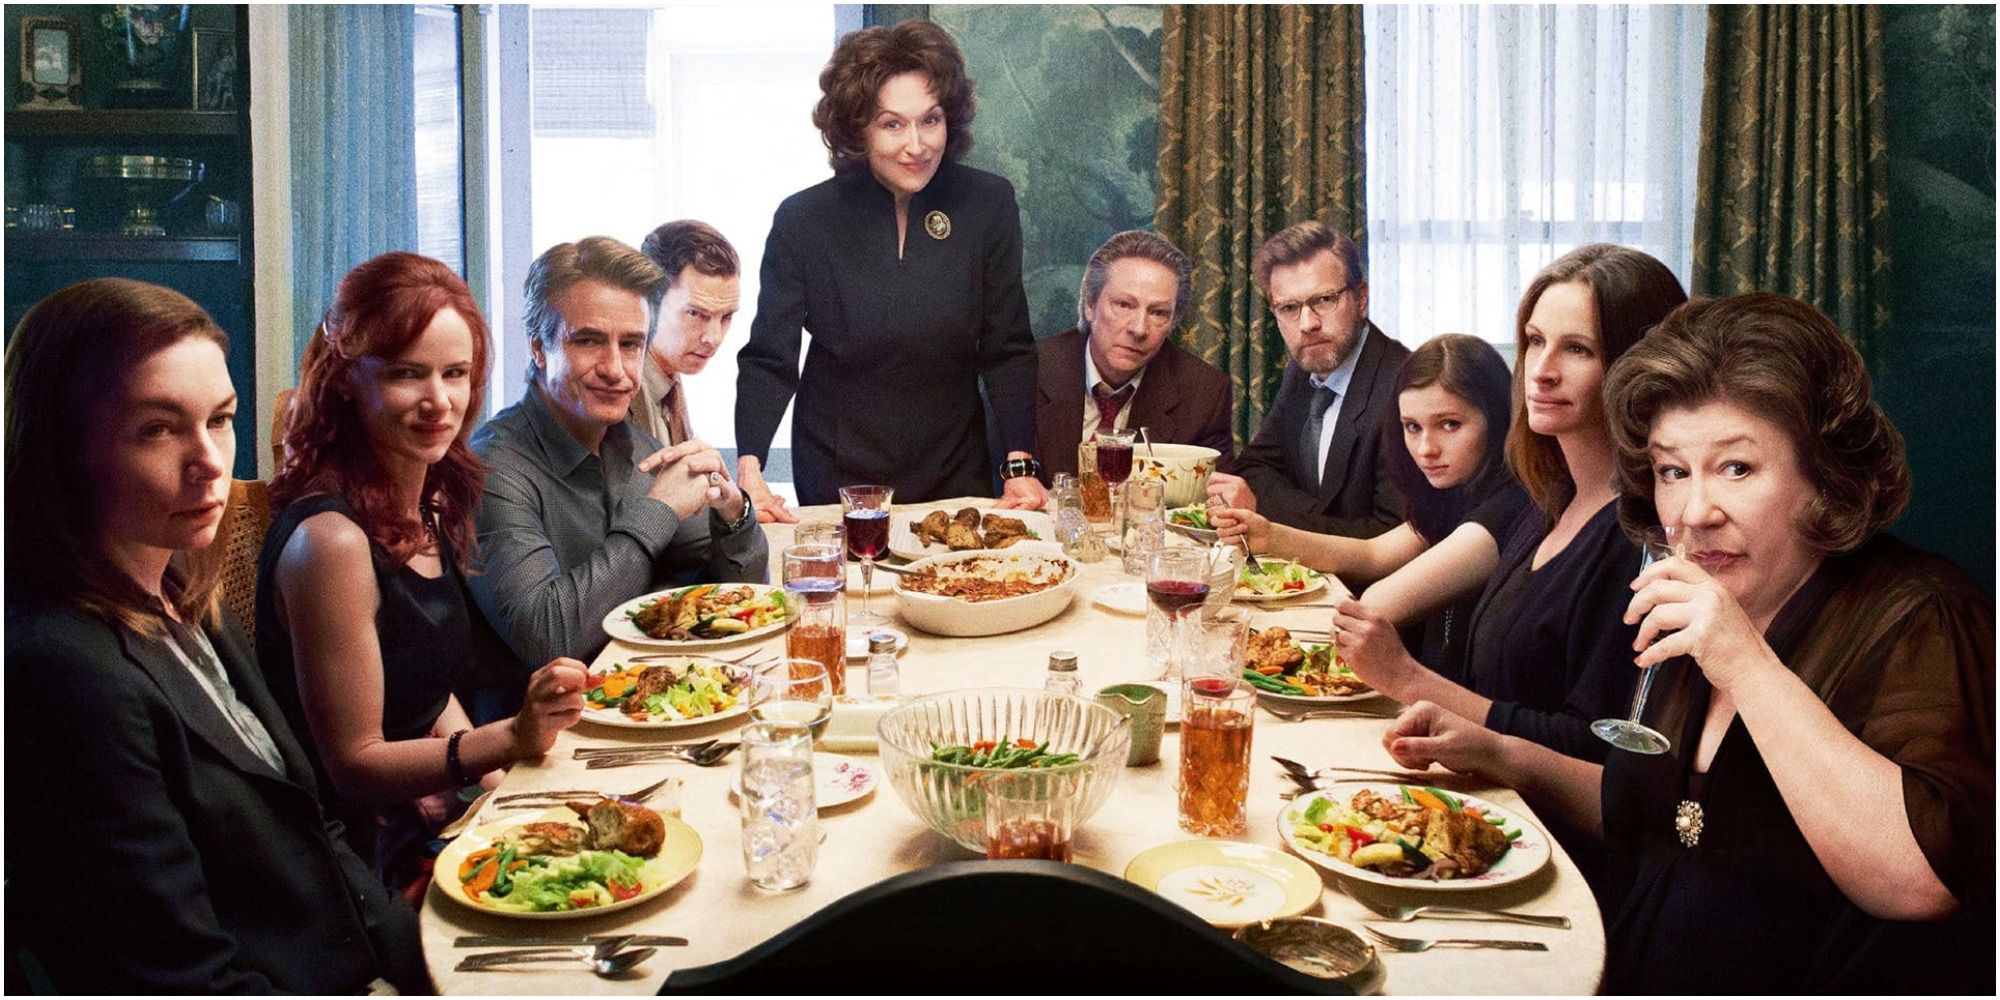 august osage county cast